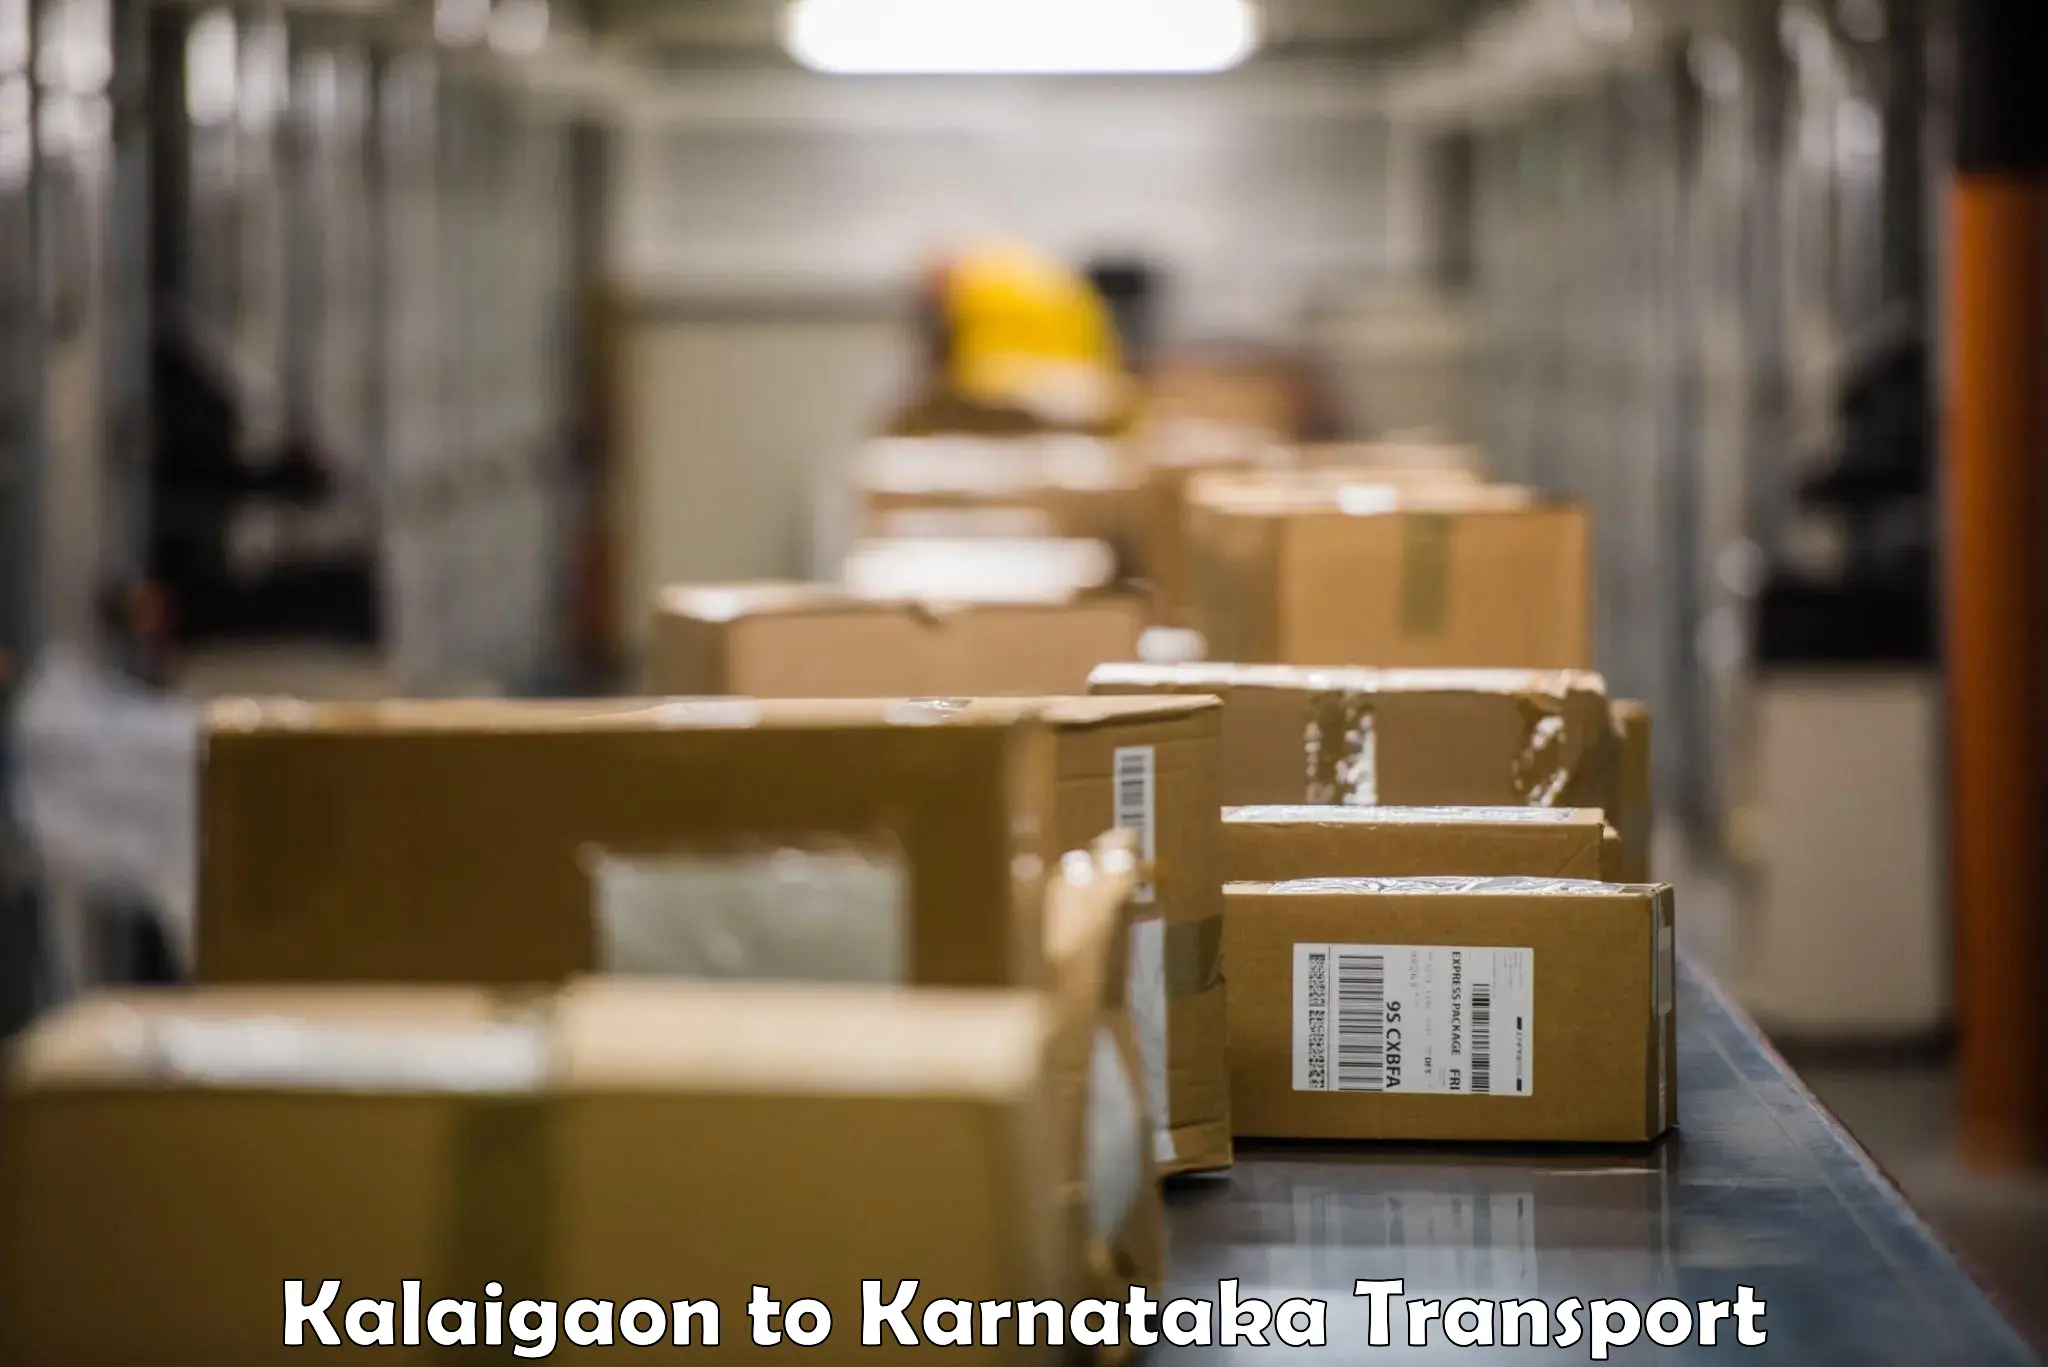 Goods delivery service in Kalaigaon to Bangalore